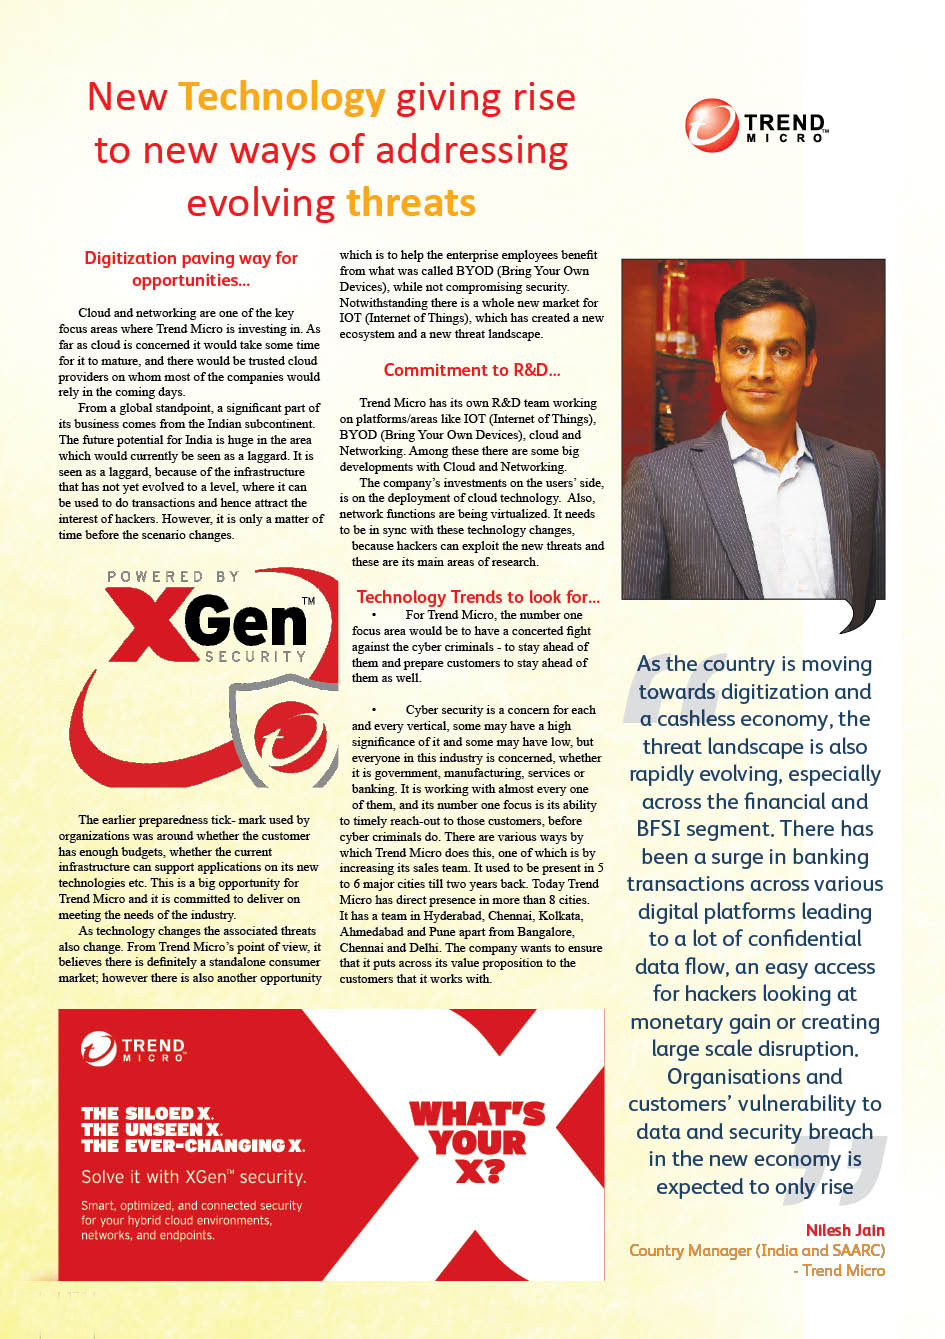 Trend Micro: New Technology giving rise to new ways of addressing evolving threats